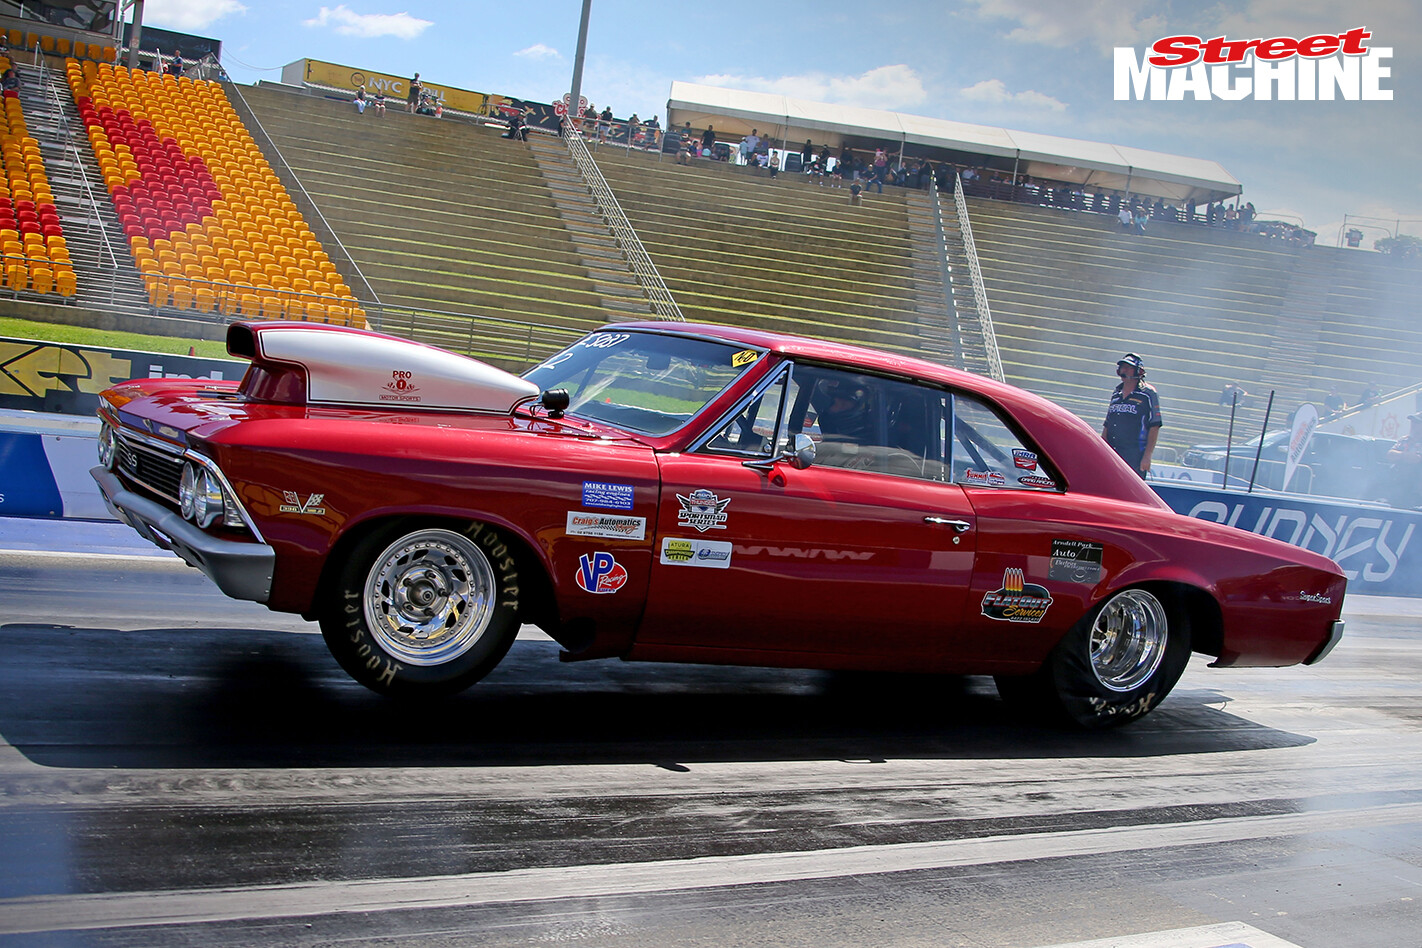 COLIN BOYD’S 1966 CHEVROLET CHEVELLE SS AT DAY OF THE DRAGS – VIDEO